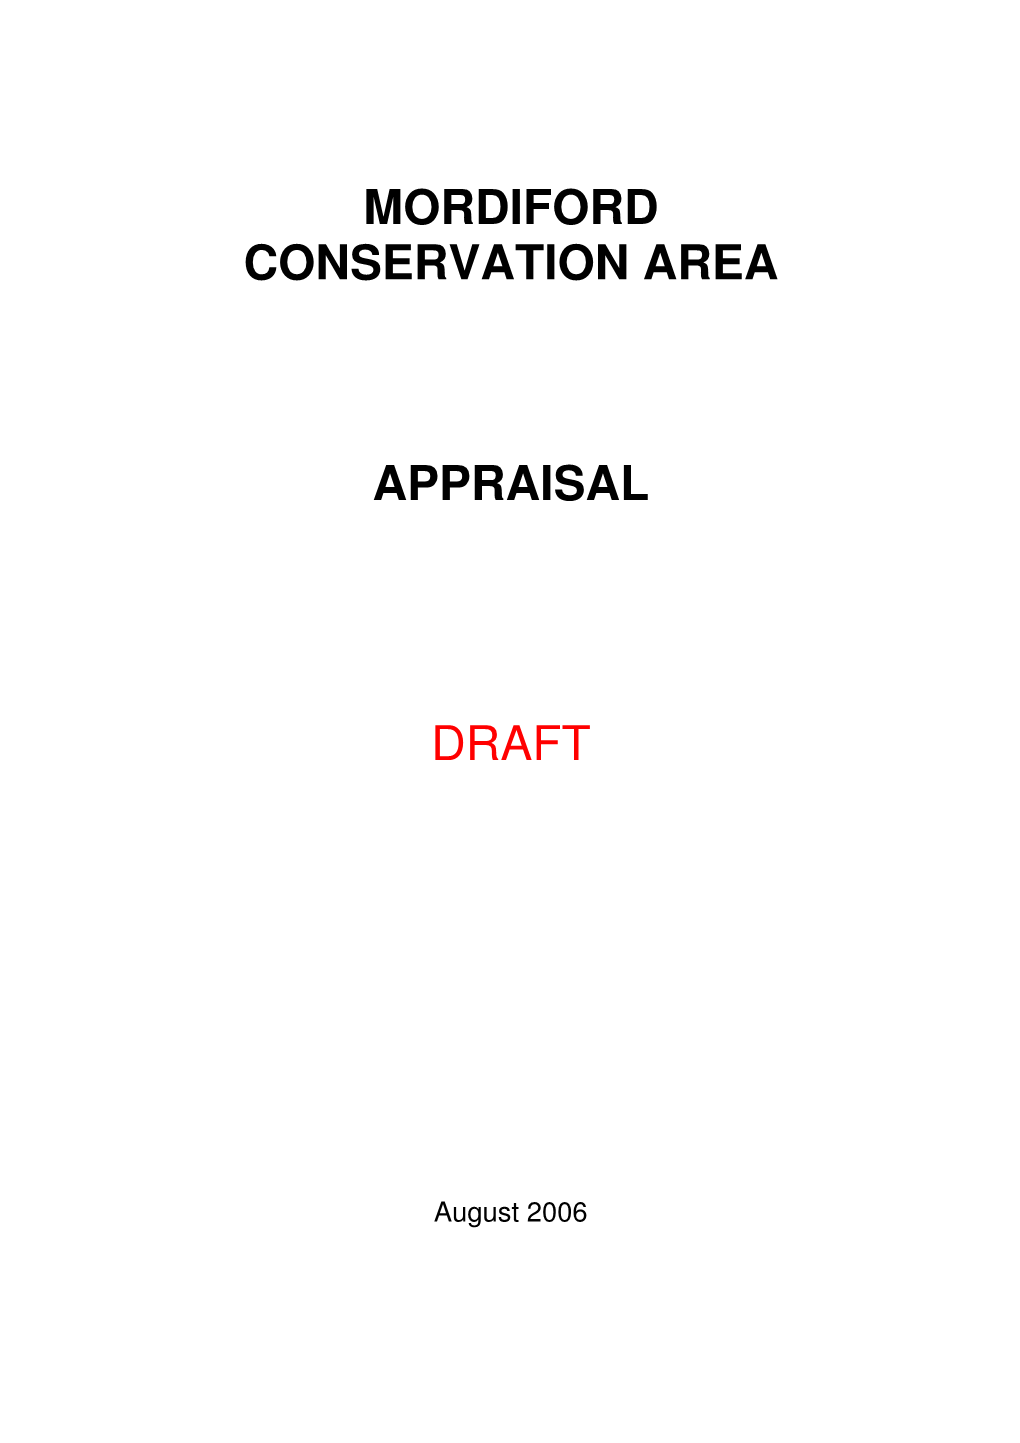 Mordiford Conservation Area Appraisal Draft